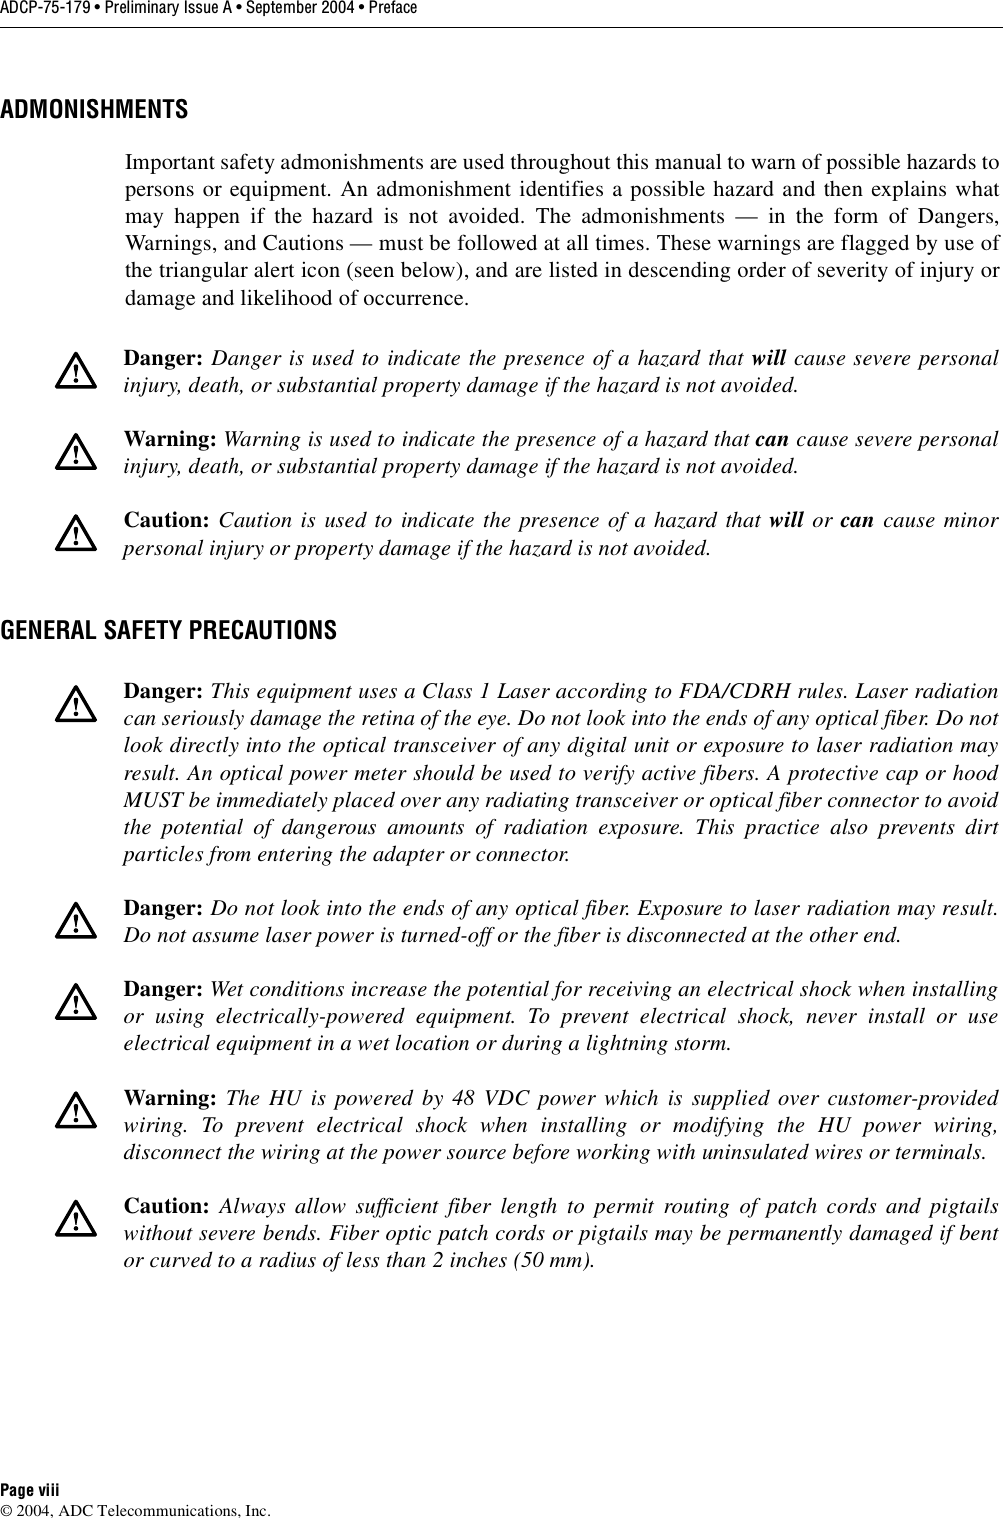 ADCP-75-179 • Preliminary Issue A • September 2004 • PrefacePage viii© 2004, ADC Telecommunications, Inc.ADMONISHMENTSImportant safety admonishments are used throughout this manual to warn of possible hazards topersons or equipment. An admonishment identifies a possible hazard and then explains whatmay happen if the hazard is not avoided. The admonishments — in the form of Dangers,Warnings, and Cautions — must be followed at all times. These warnings are flagged by use ofthe triangular alert icon (seen below), and are listed in descending order of severity of injury ordamage and likelihood of occurrence.GENERAL SAFETY PRECAUTIONSDanger: Danger is used to indicate the presence of a hazard that will cause severe personalinjury, death, or substantial property damage if the hazard is not avoided.Warning: Warning is used to indicate the presence of a hazard that can cause severe personalinjury, death, or substantial property damage if the hazard is not avoided.Caution: Caution is used to indicate the presence of a hazard that will or can cause minorpersonal injury or property damage if the hazard is not avoided.Danger: This equipment uses a Class 1 Laser according to FDA/CDRH rules. Laser radiationcan seriously damage the retina of the eye. Do not look into the ends of any optical fiber. Do notlook directly into the optical transceiver of any digital unit or exposure to laser radiation mayresult. An optical power meter should be used to verify active fibers. A protective cap or hoodMUST be immediately placed over any radiating transceiver or optical fiber connector to avoidthe potential of dangerous amounts of radiation exposure. This practice also prevents dirtparticles from entering the adapter or connector. Danger: Do not look into the ends of any optical fiber. Exposure to laser radiation may result.Do not assume laser power is turned-off or the fiber is disconnected at the other end. Danger: Wet conditions increase the potential for receiving an electrical shock when installingor using electrically-powered equipment. To prevent electrical shock, never install or useelectrical equipment in a wet location or during a lightning storm. Warning:  The HU is powered by 48 VDC power which is supplied over customer-providedwiring. To prevent electrical shock when installing or modifying the HU power wiring,disconnect the wiring at the power source before working with uninsulated wires or terminals. Caution: Always allow sufficient fiber length to permit routing of patch cords and pigtailswithout severe bends. Fiber optic patch cords or pigtails may be permanently damaged if bentor curved to a radius of less than 2 inches (50 mm). 